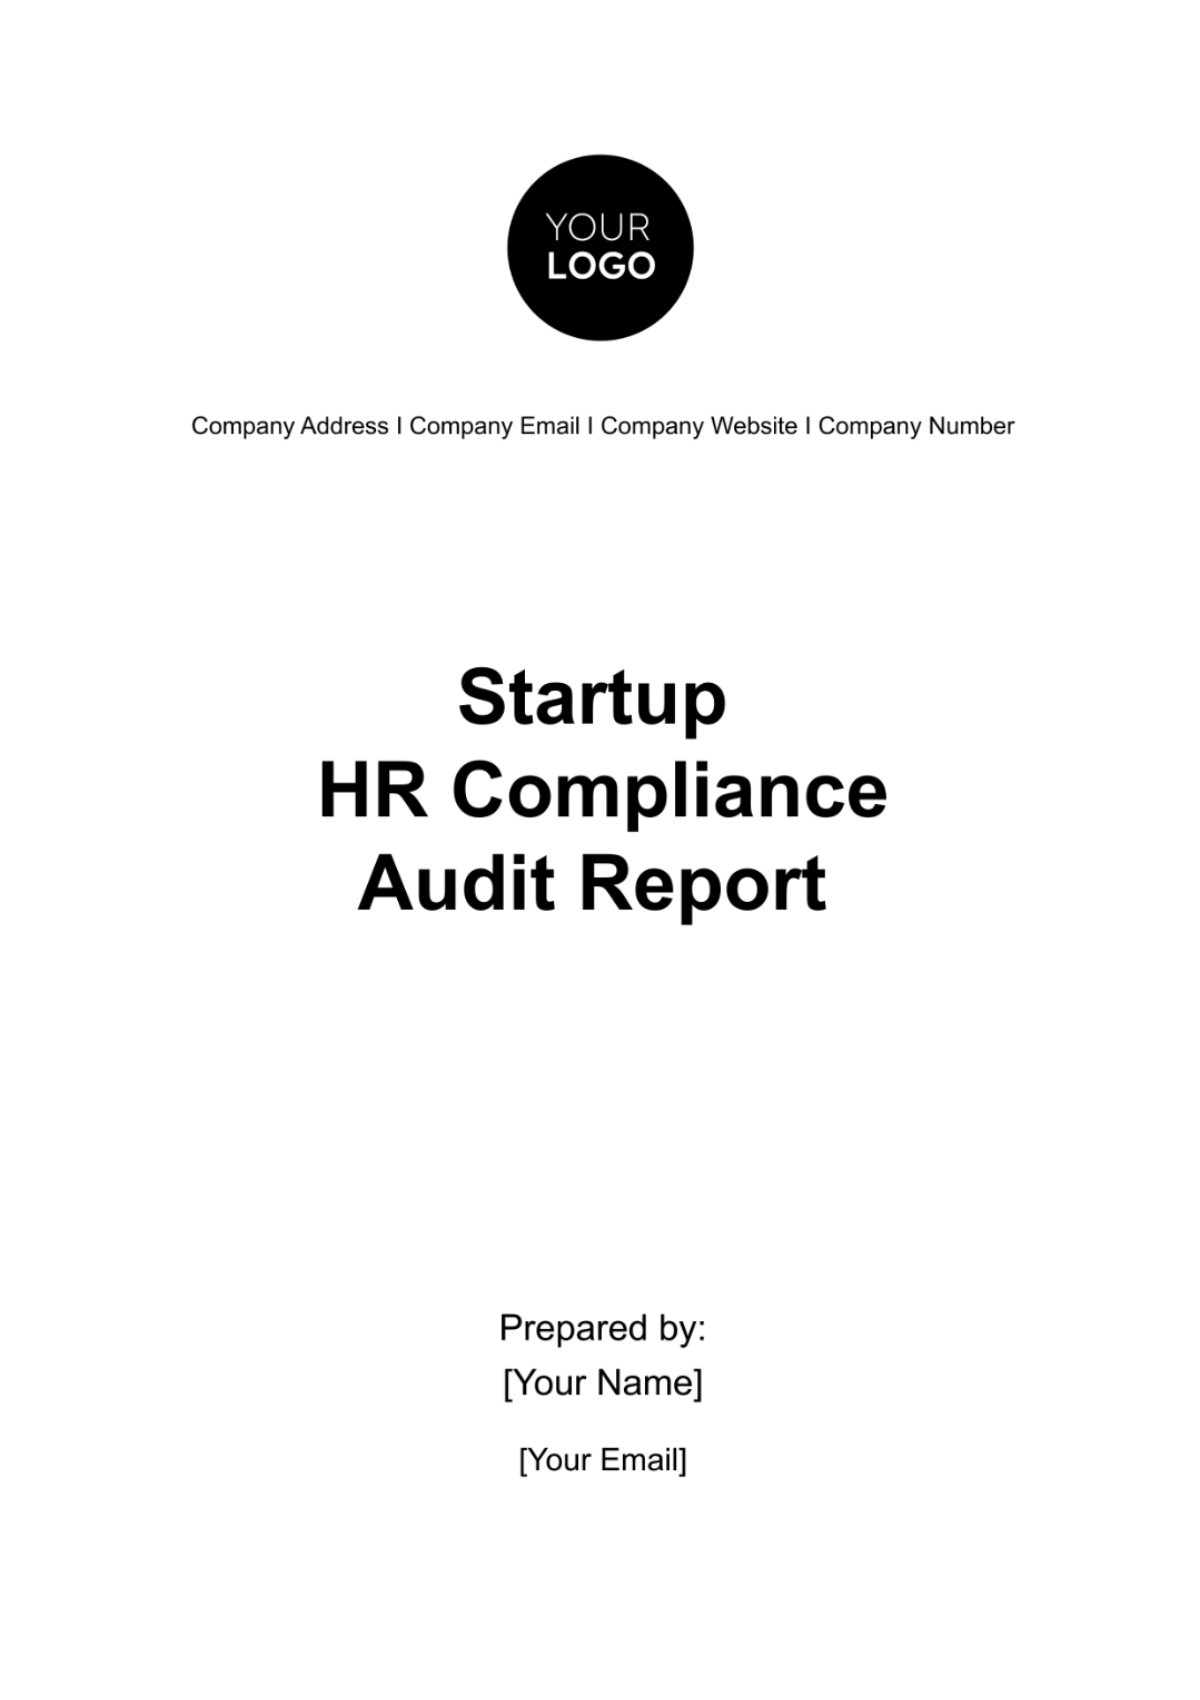 Startup HR Compliance Audit Report Template